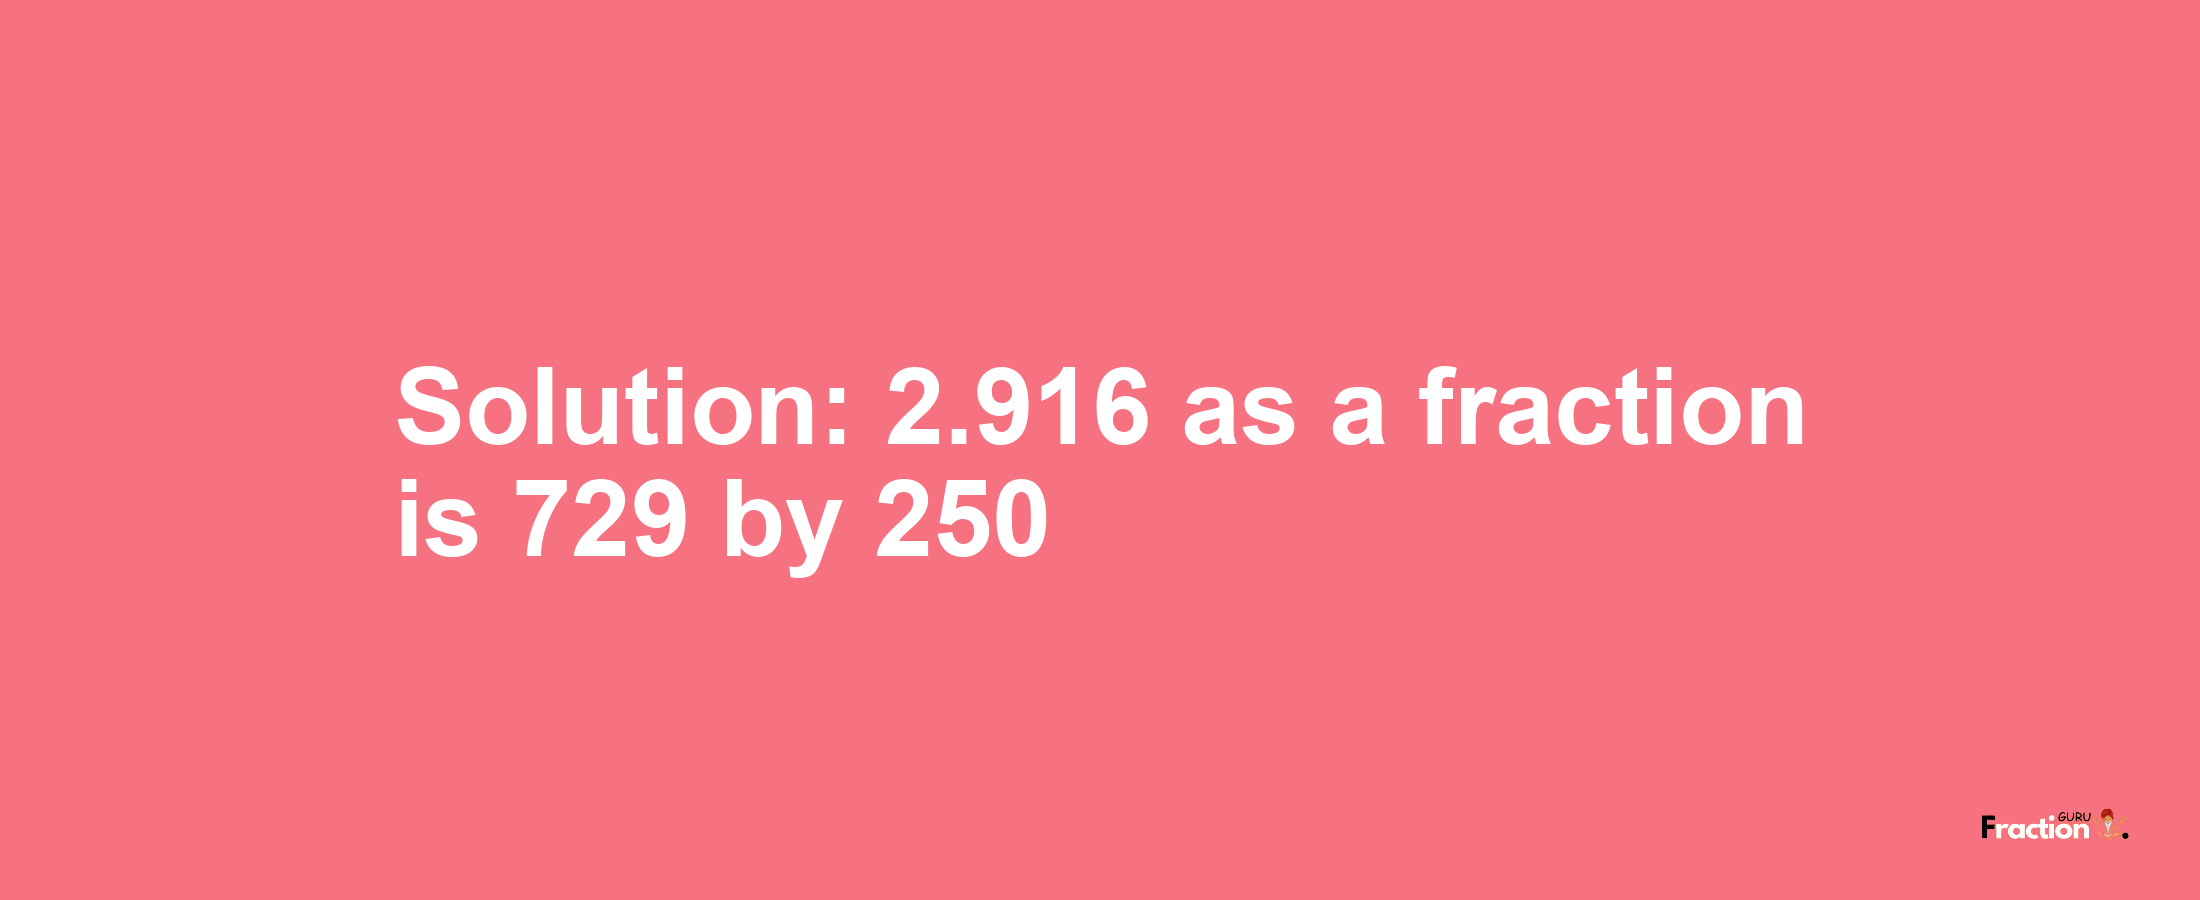 Solution:2.916 as a fraction is 729/250